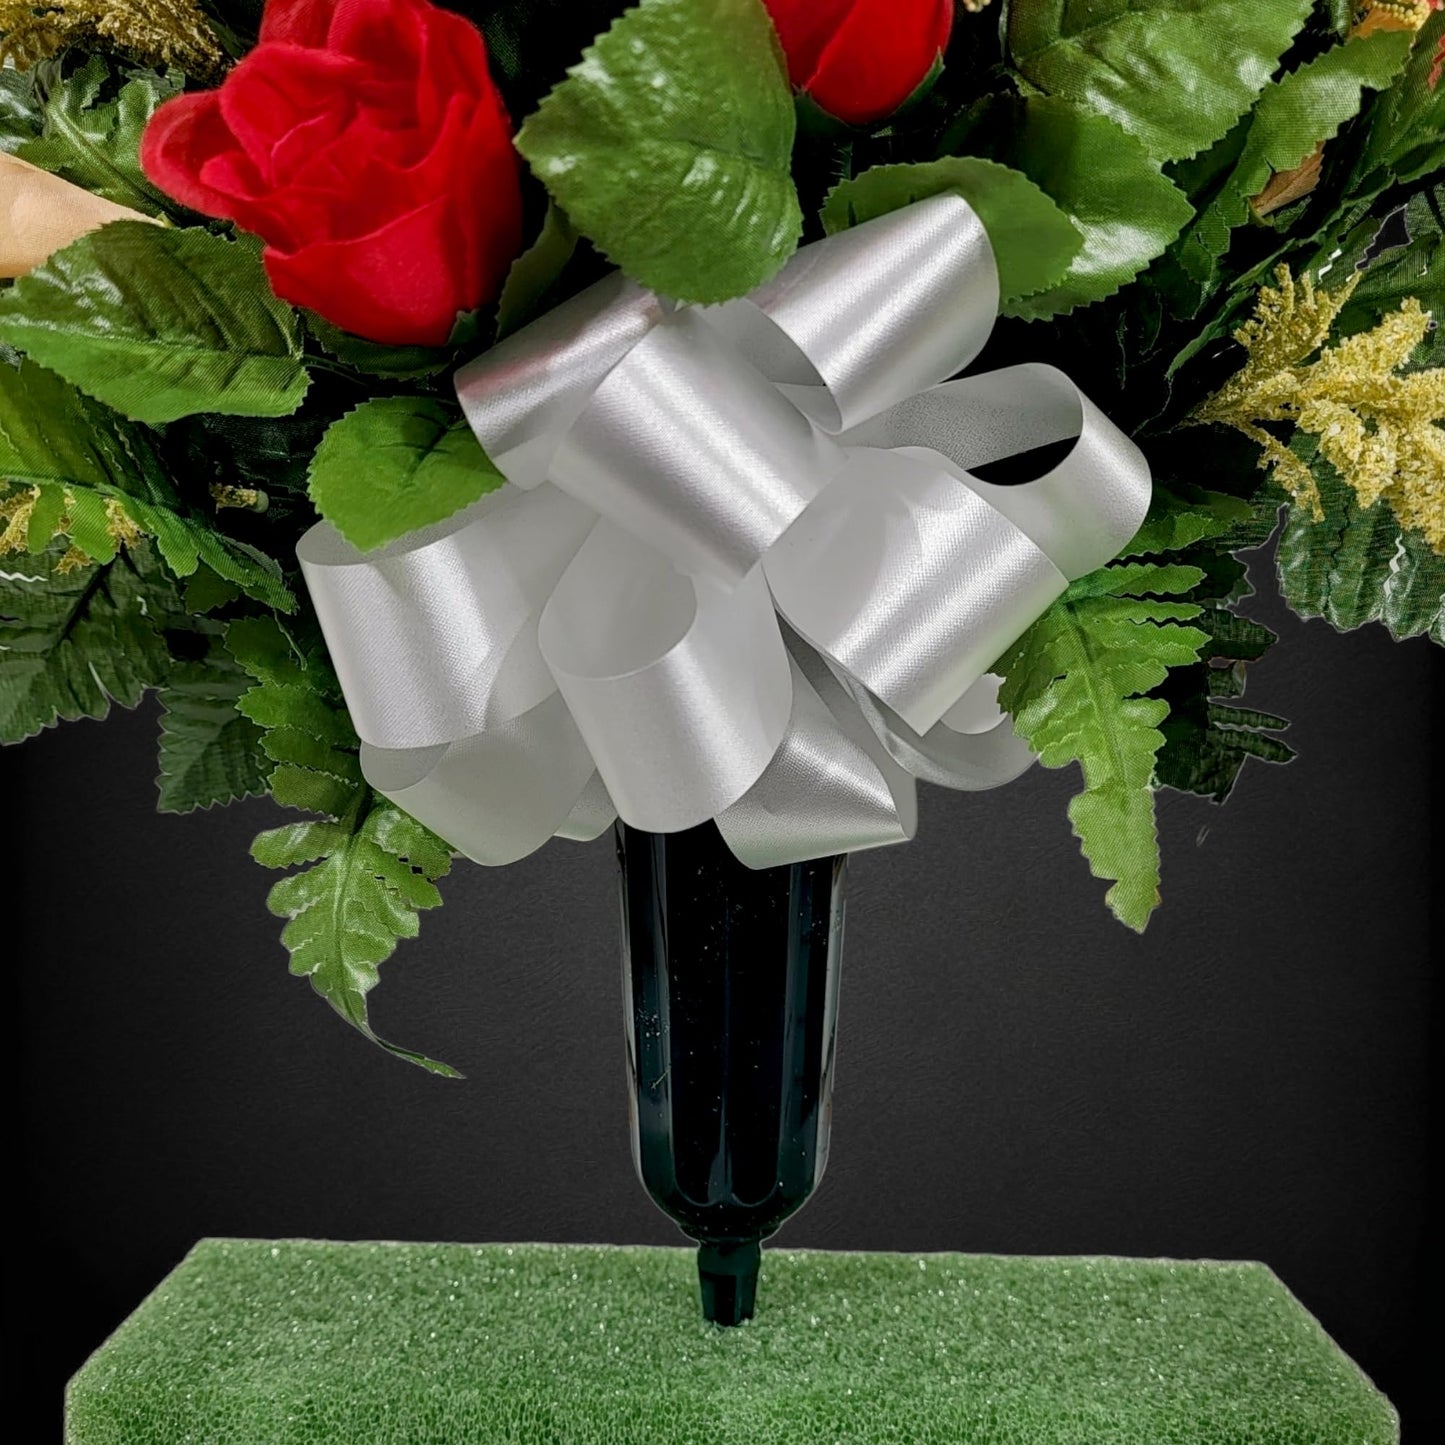 Realistic Artificial Cemetery Flowers - Silk Faux Floral Red Rose and Calla Lily - Bouquet Pair for Grave - Headstone Decoration - Memorial Flowers